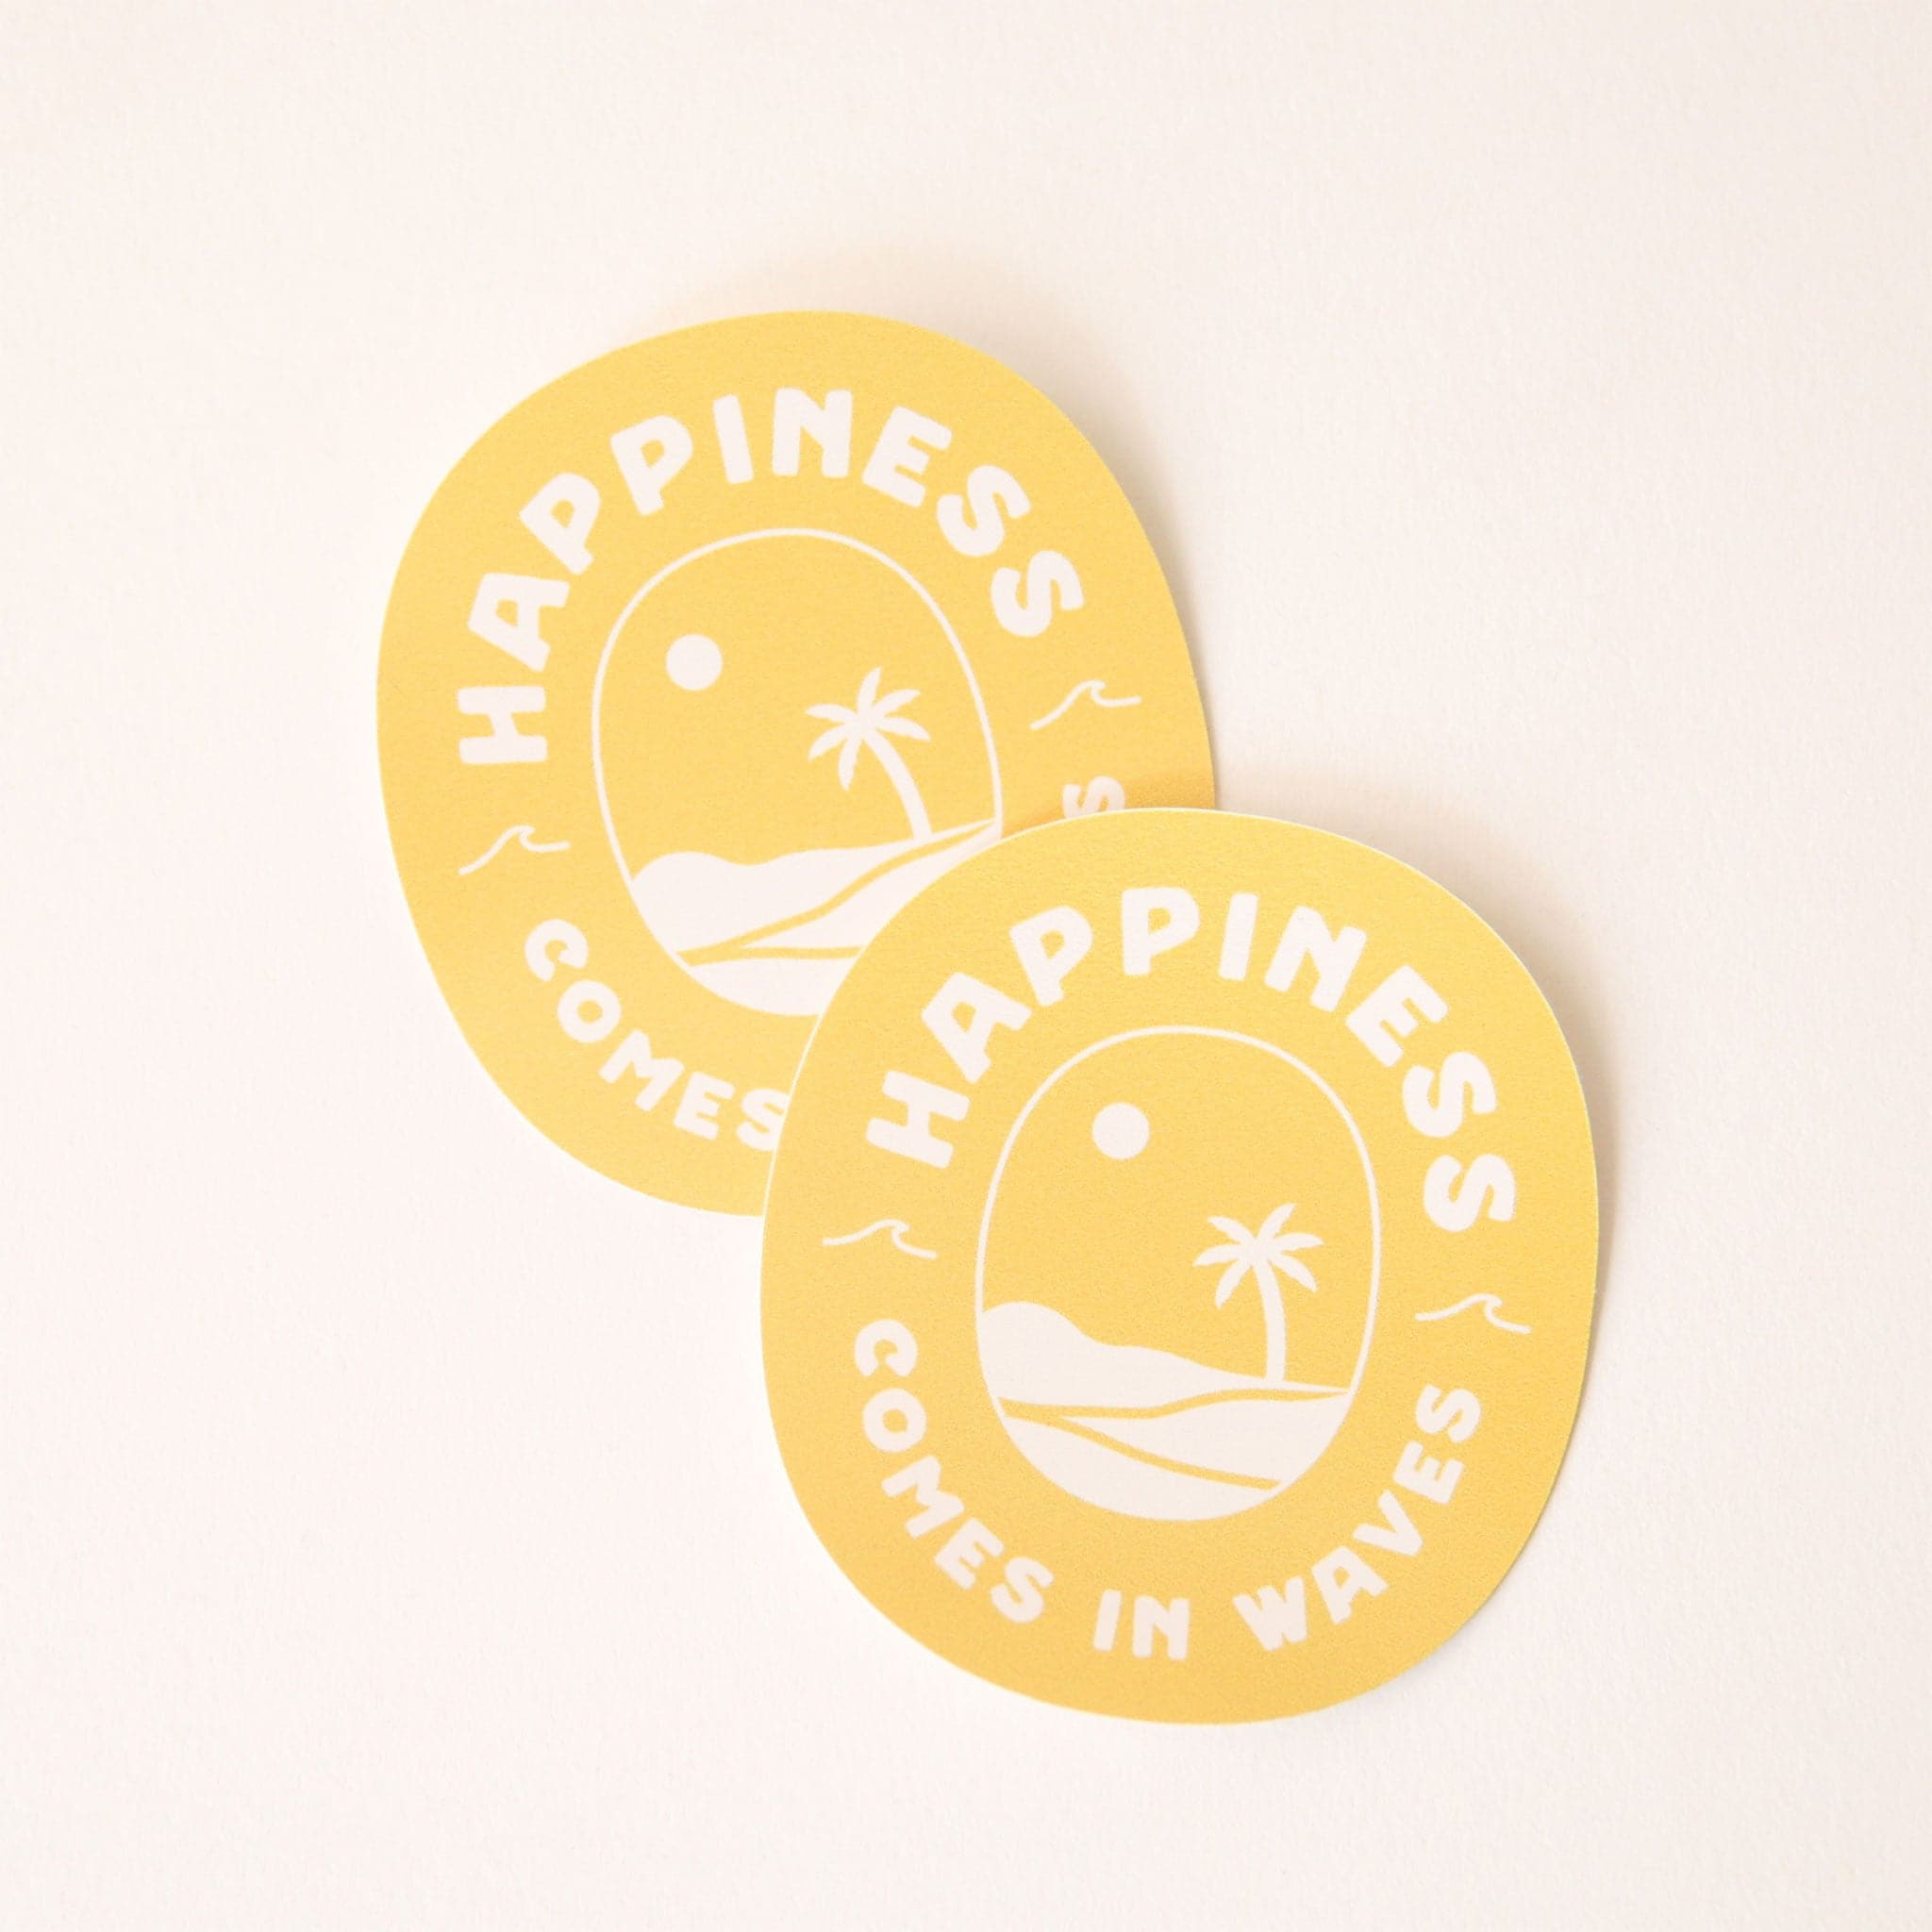 A yellow circle vinyl sticker with a beach design featuring a palm tree, a sun and the words "Happiness comes in waves" around the edge of the circle.